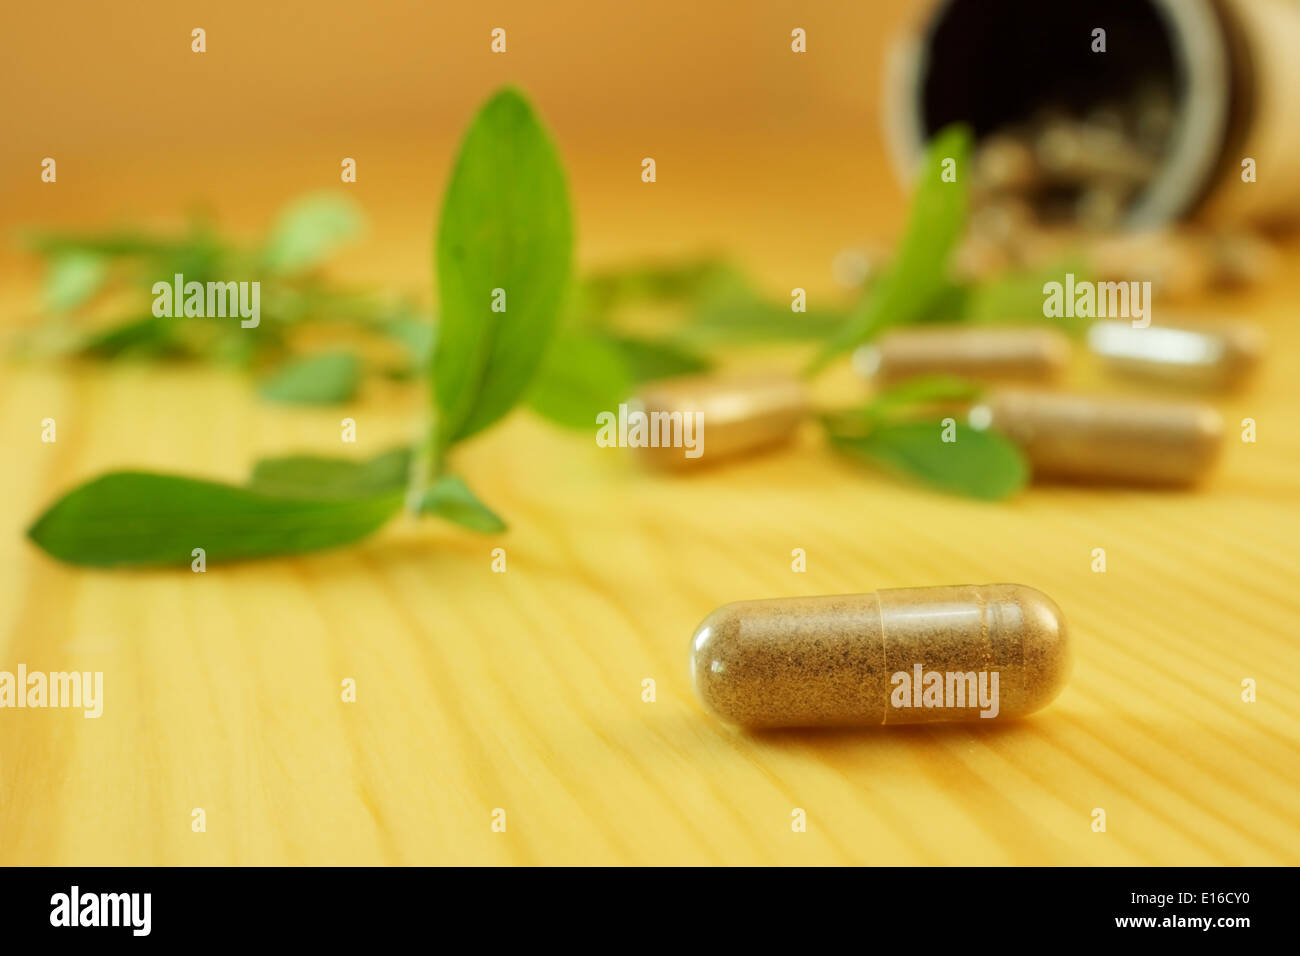 Herb capsule with green herbal leaf Stock Photo